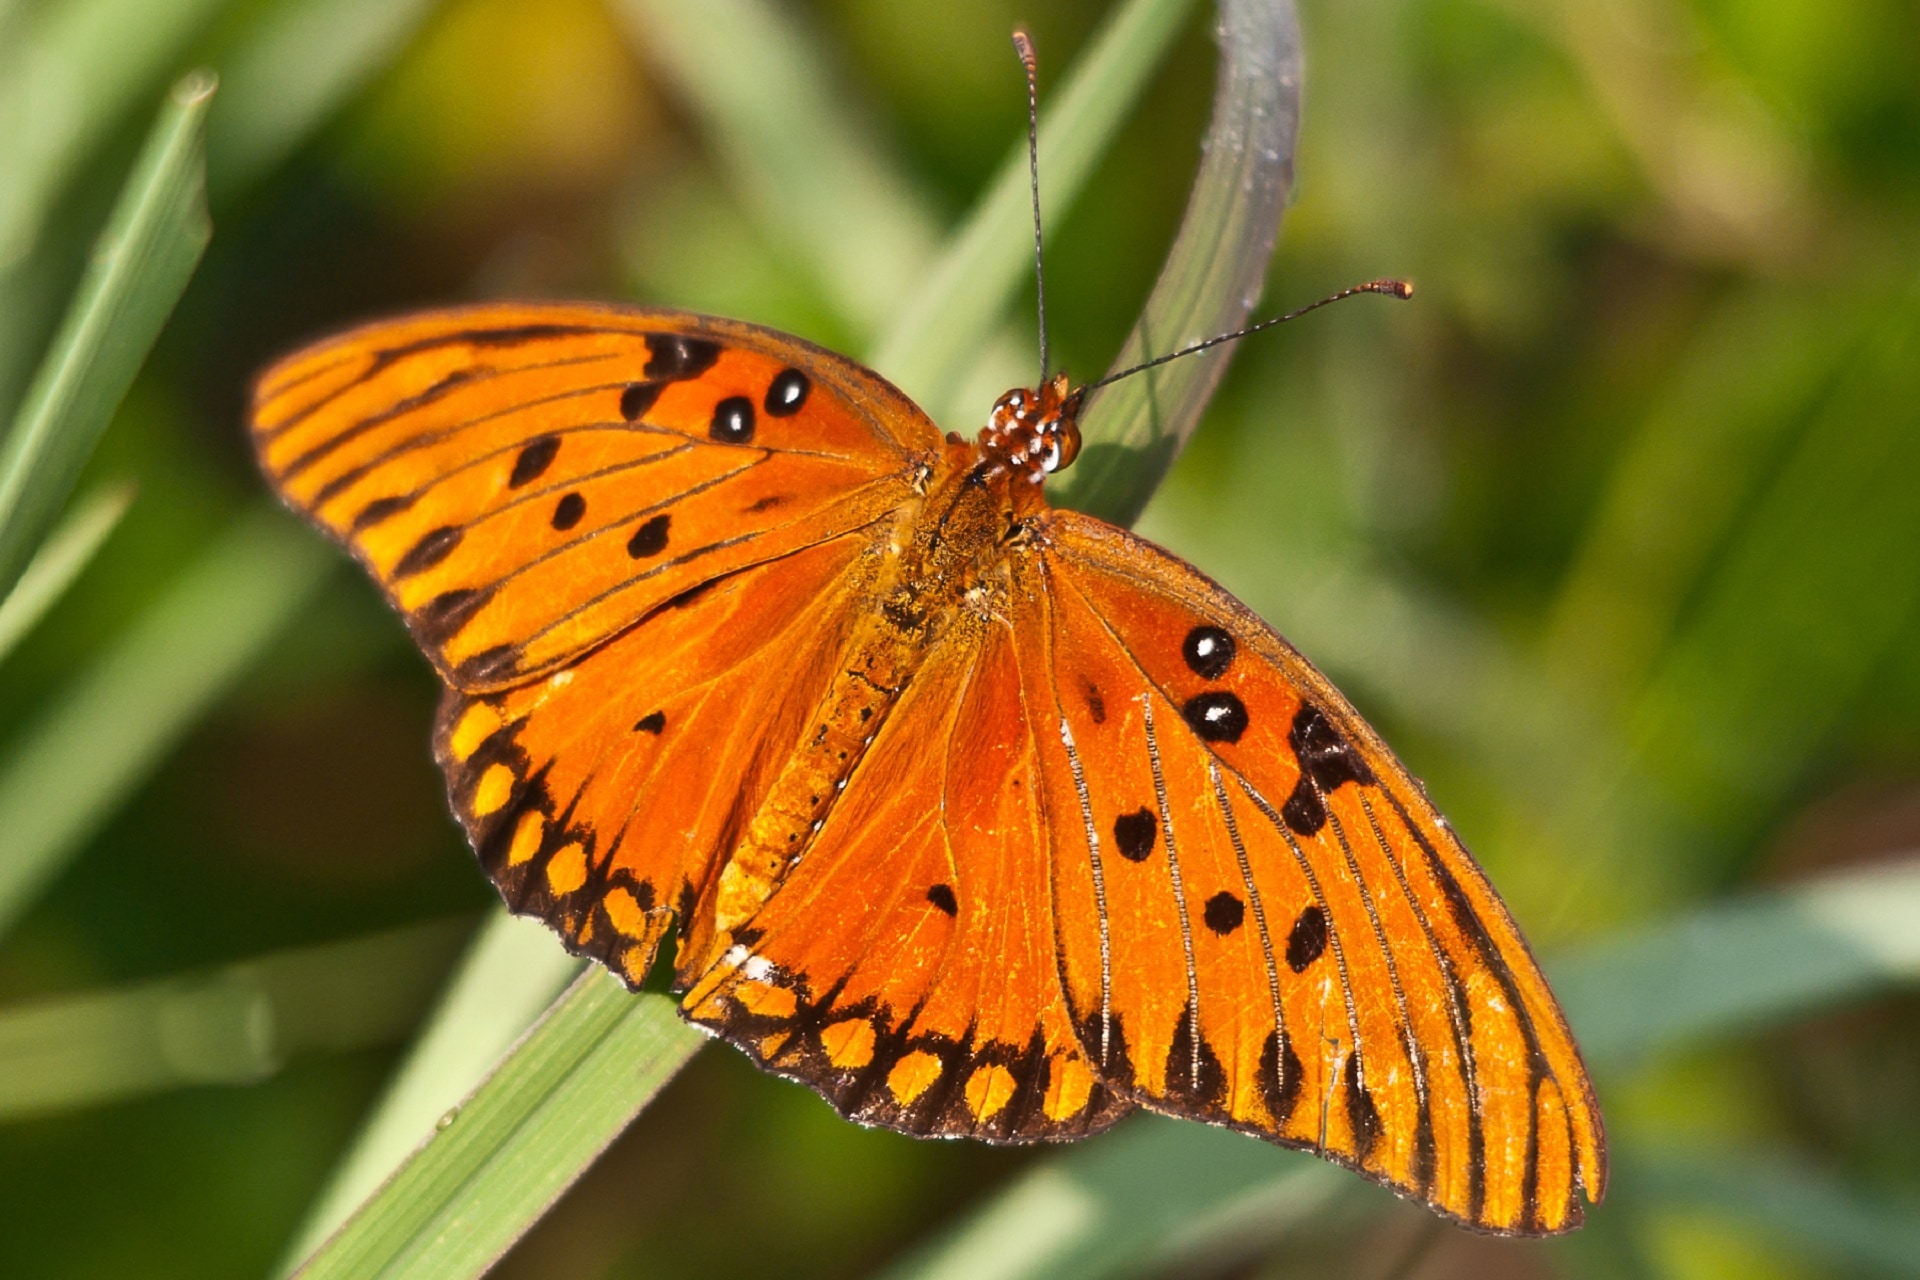 Gulf Fritillary, Insect, Butterfly, butterfly - insect, insect